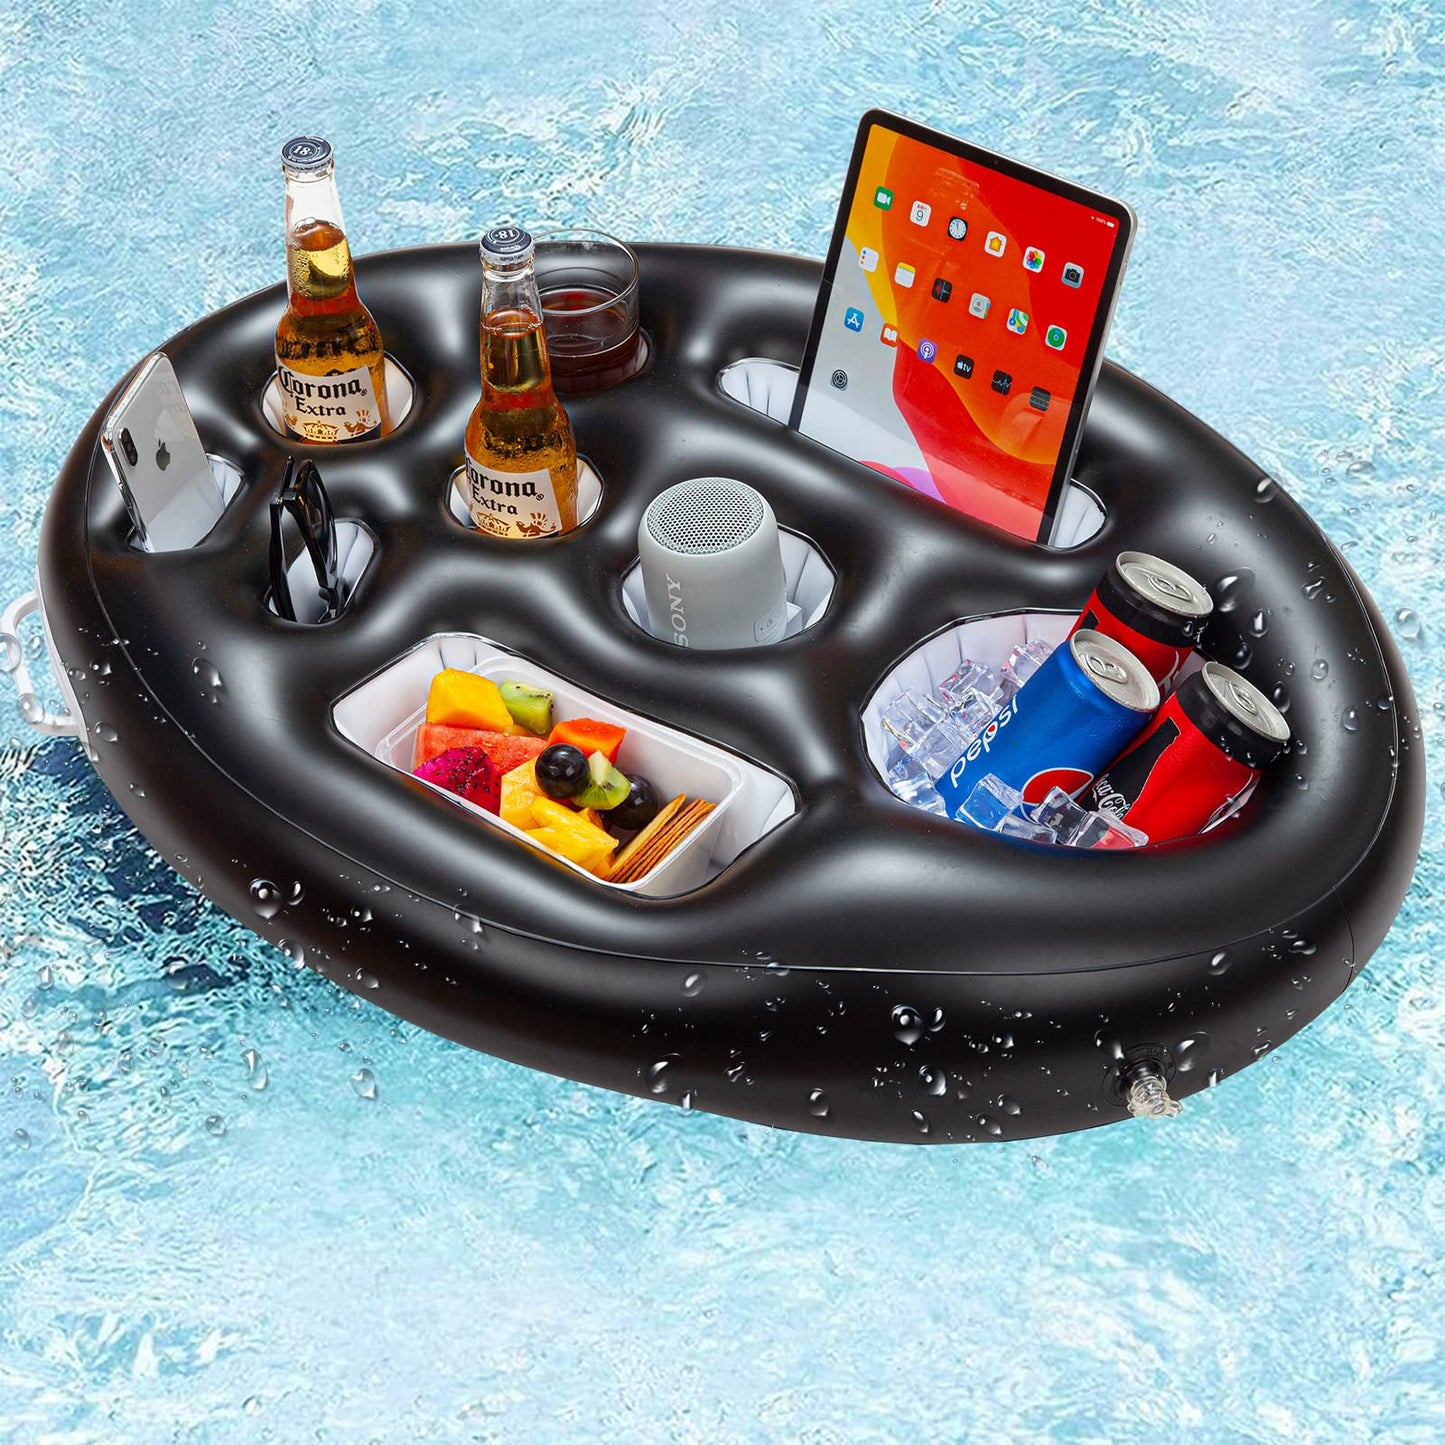 LRIGYEH Pool Accessories Inflatable Floating Drink Holder with 9 Holes Capacity Drink Float for Pools & Beach, Hot Tub Accessories Black